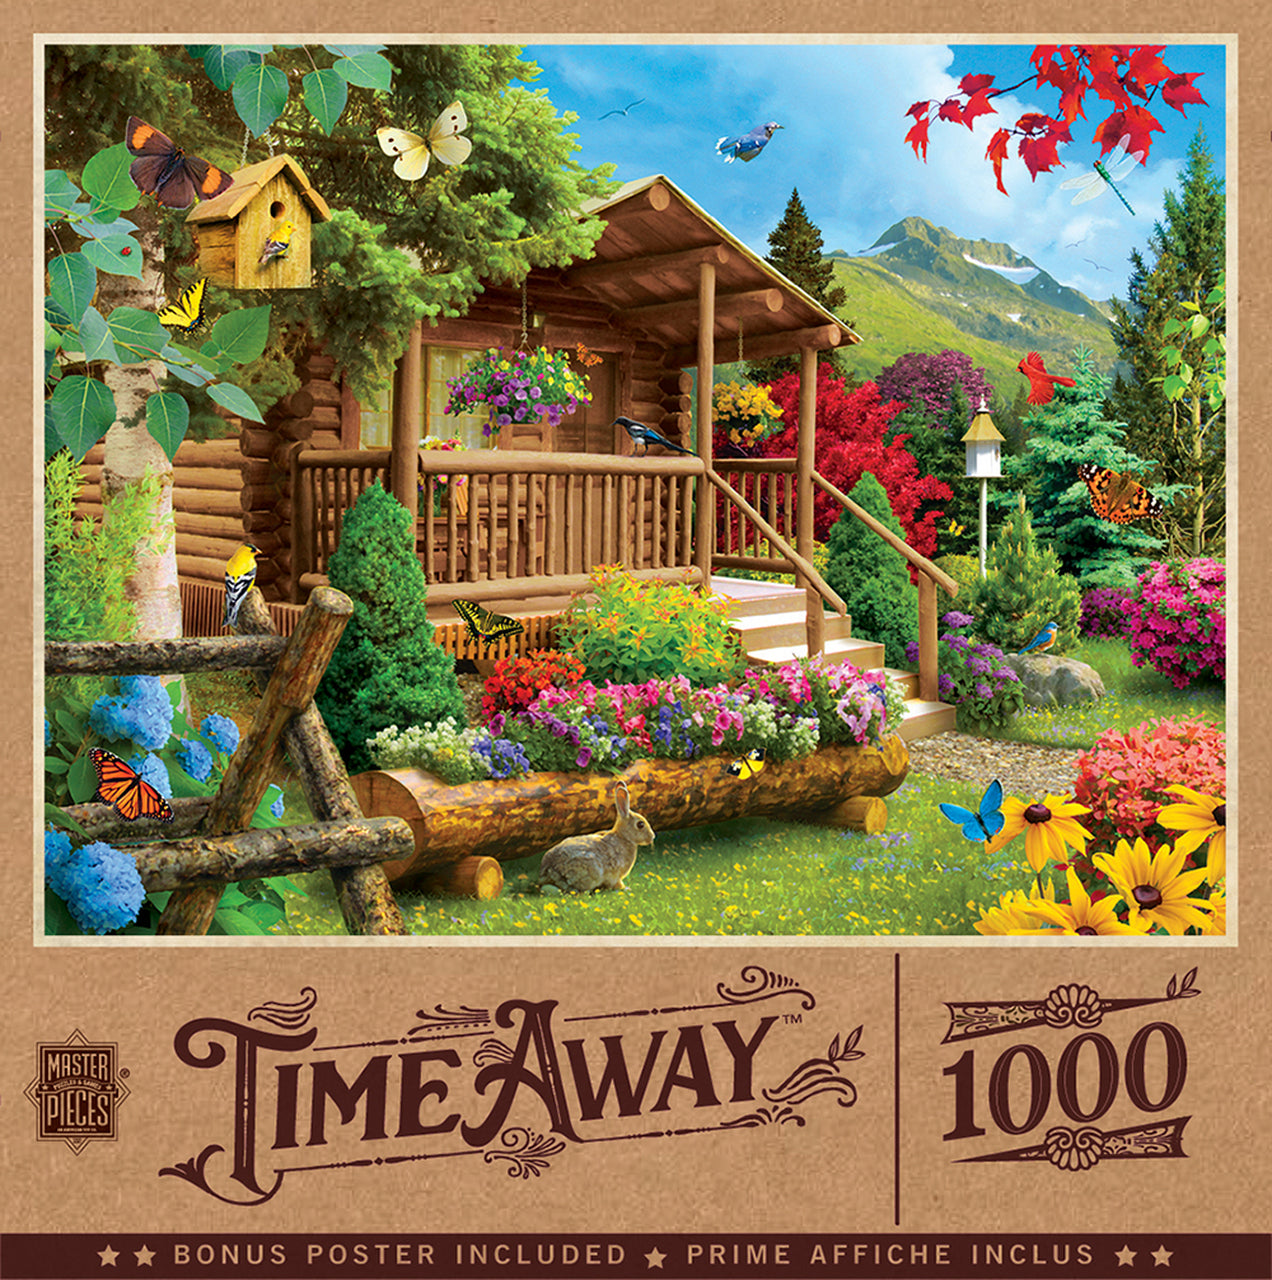 Time Away - Summerscape 1000 Piece Jigsaw Puzzle by Masterpieces